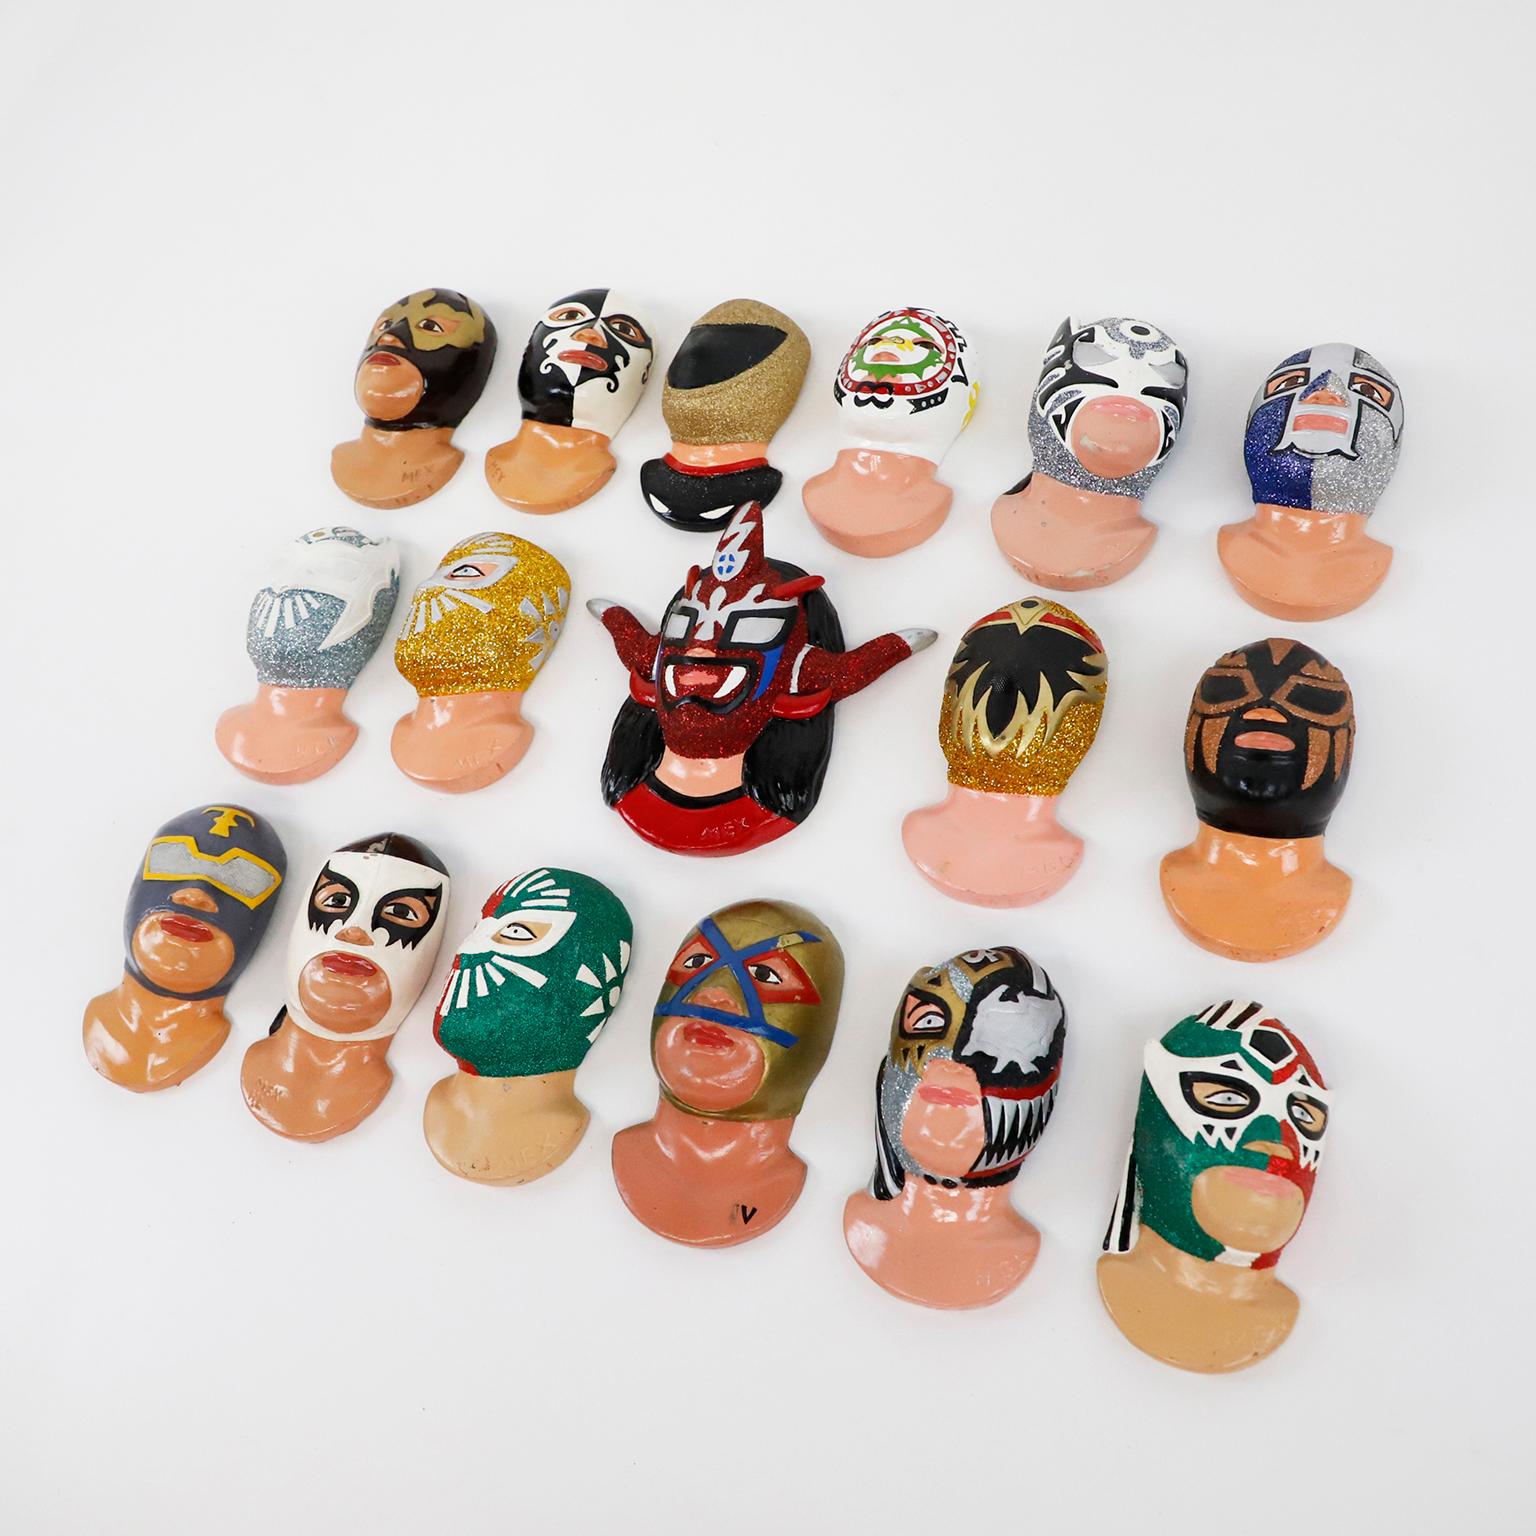 We offer this fantastic set of 18 Mexican wrestling fighters, made in resin and hand painted, circa 1980.